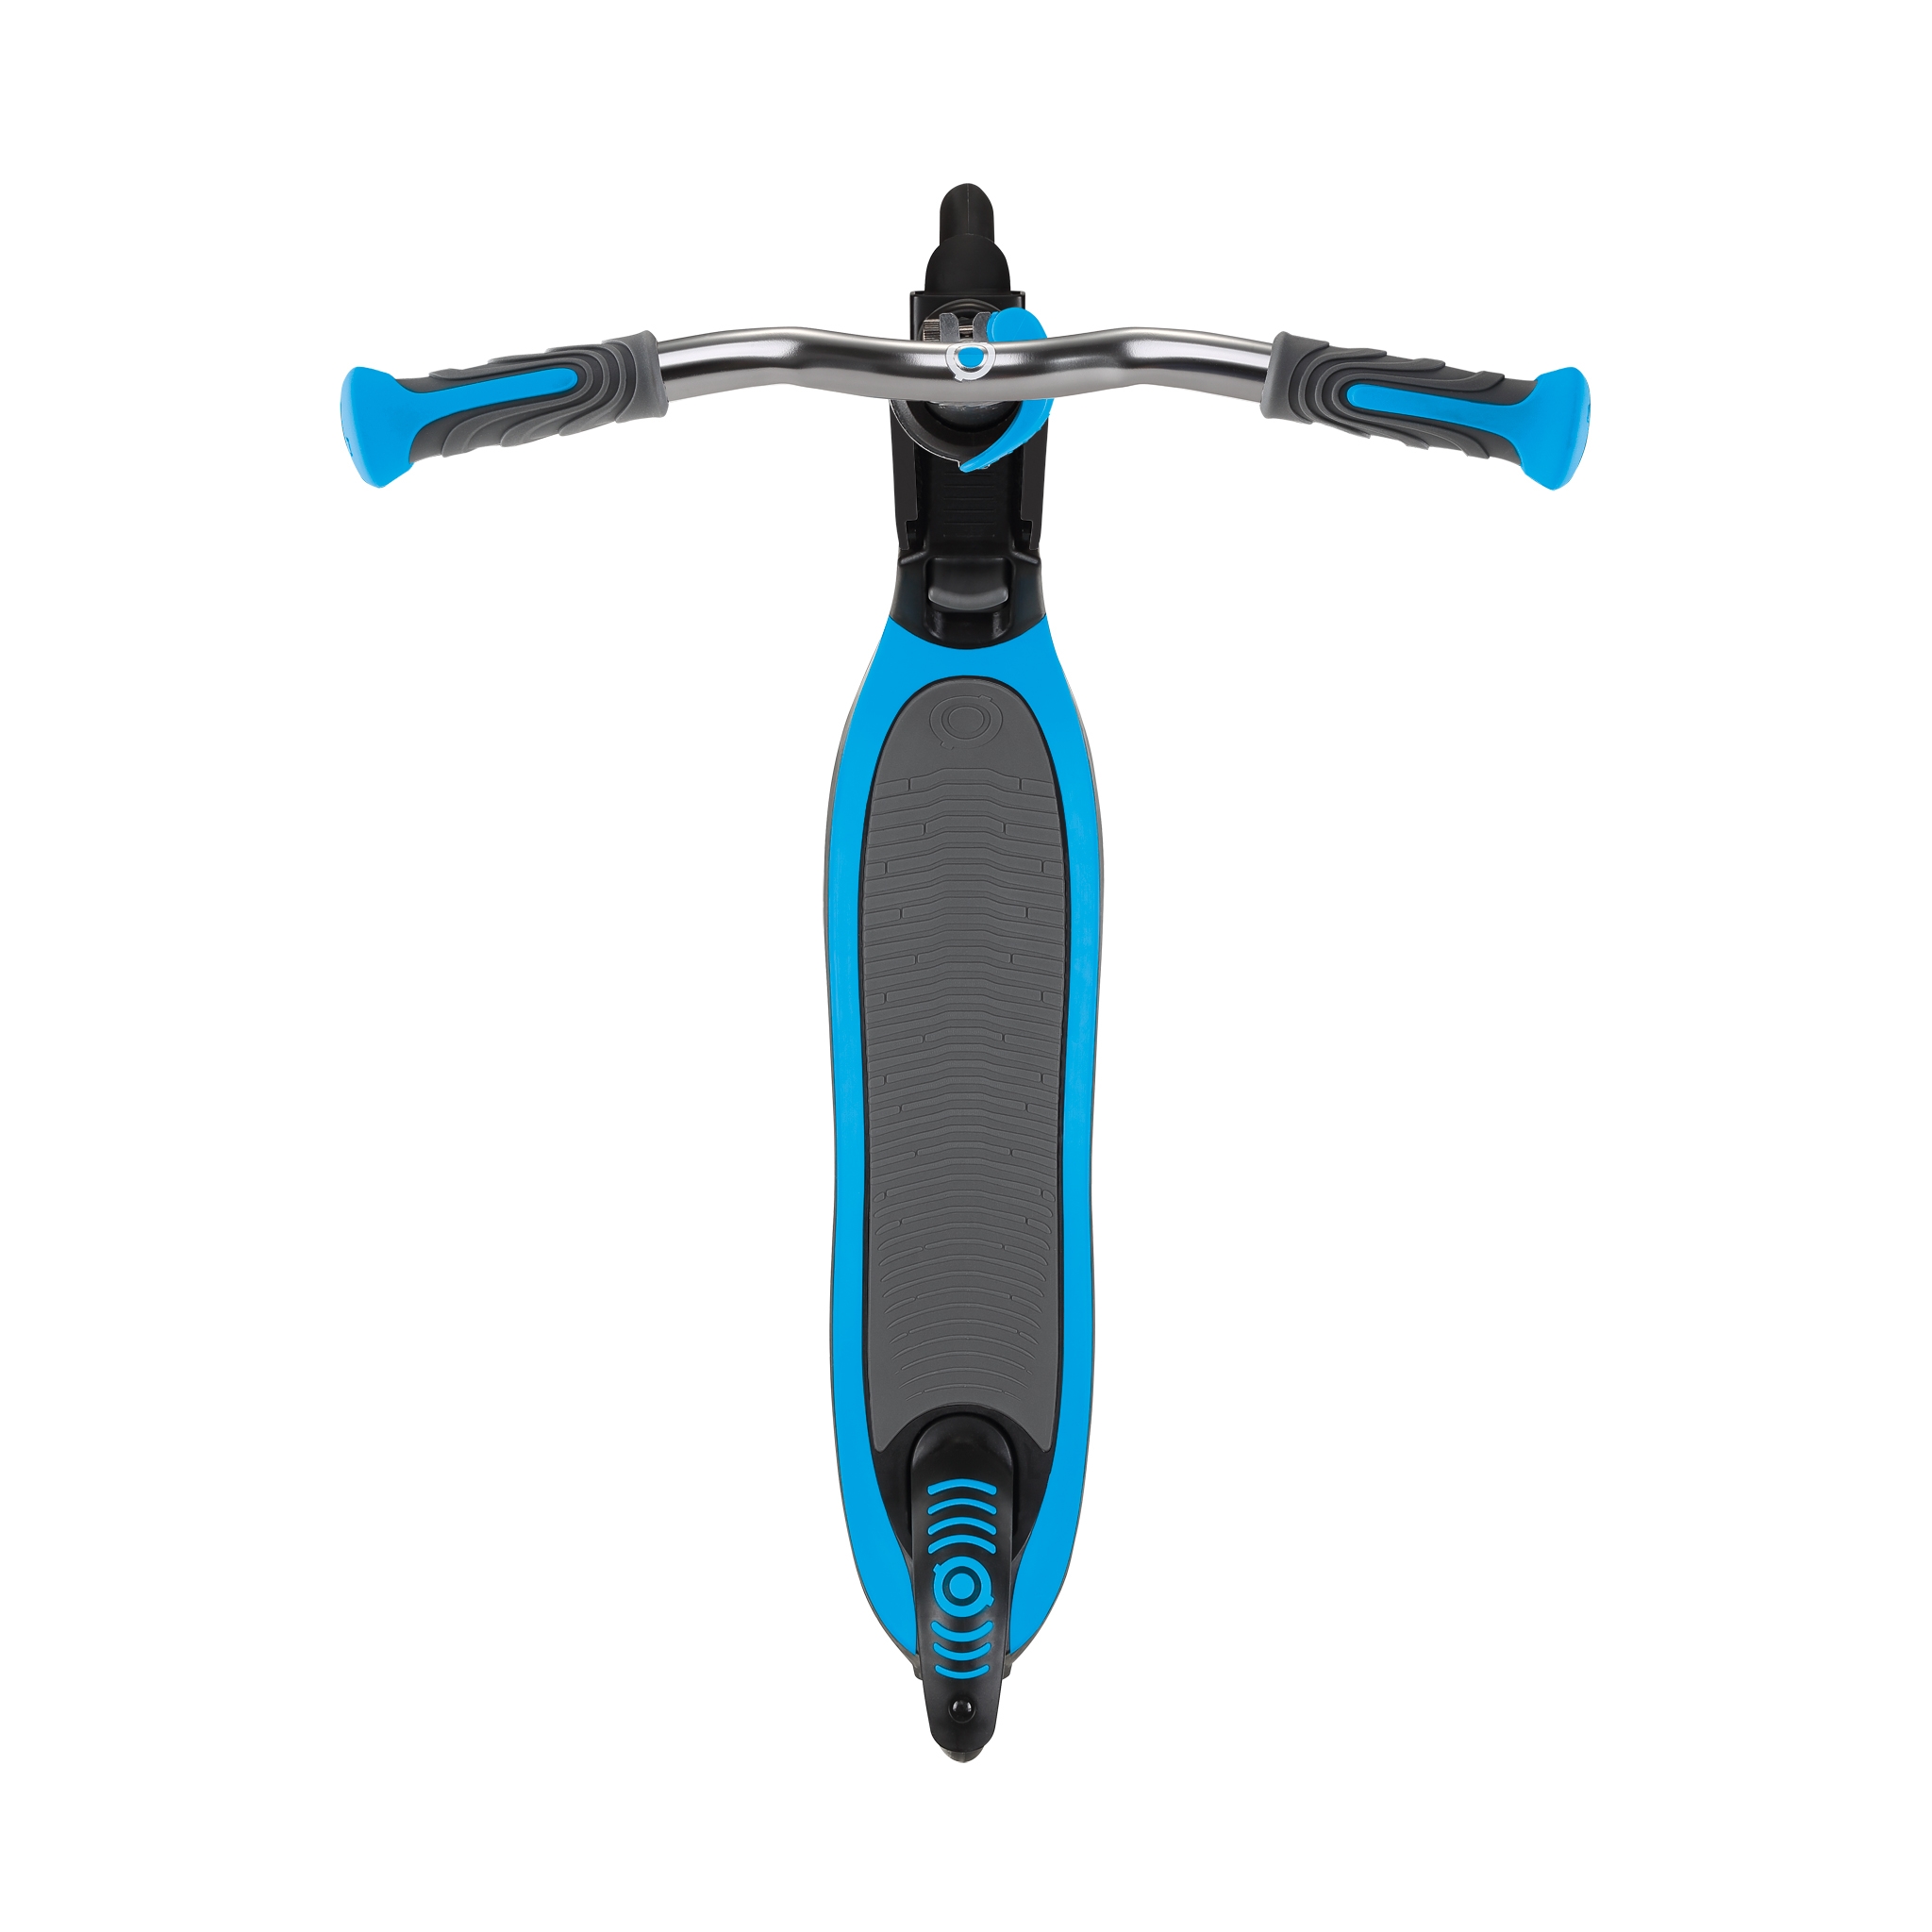 FLOW-FOLDABLE-125-2-wheel-scooter-with-triple-deck-structure-sky-blue 5